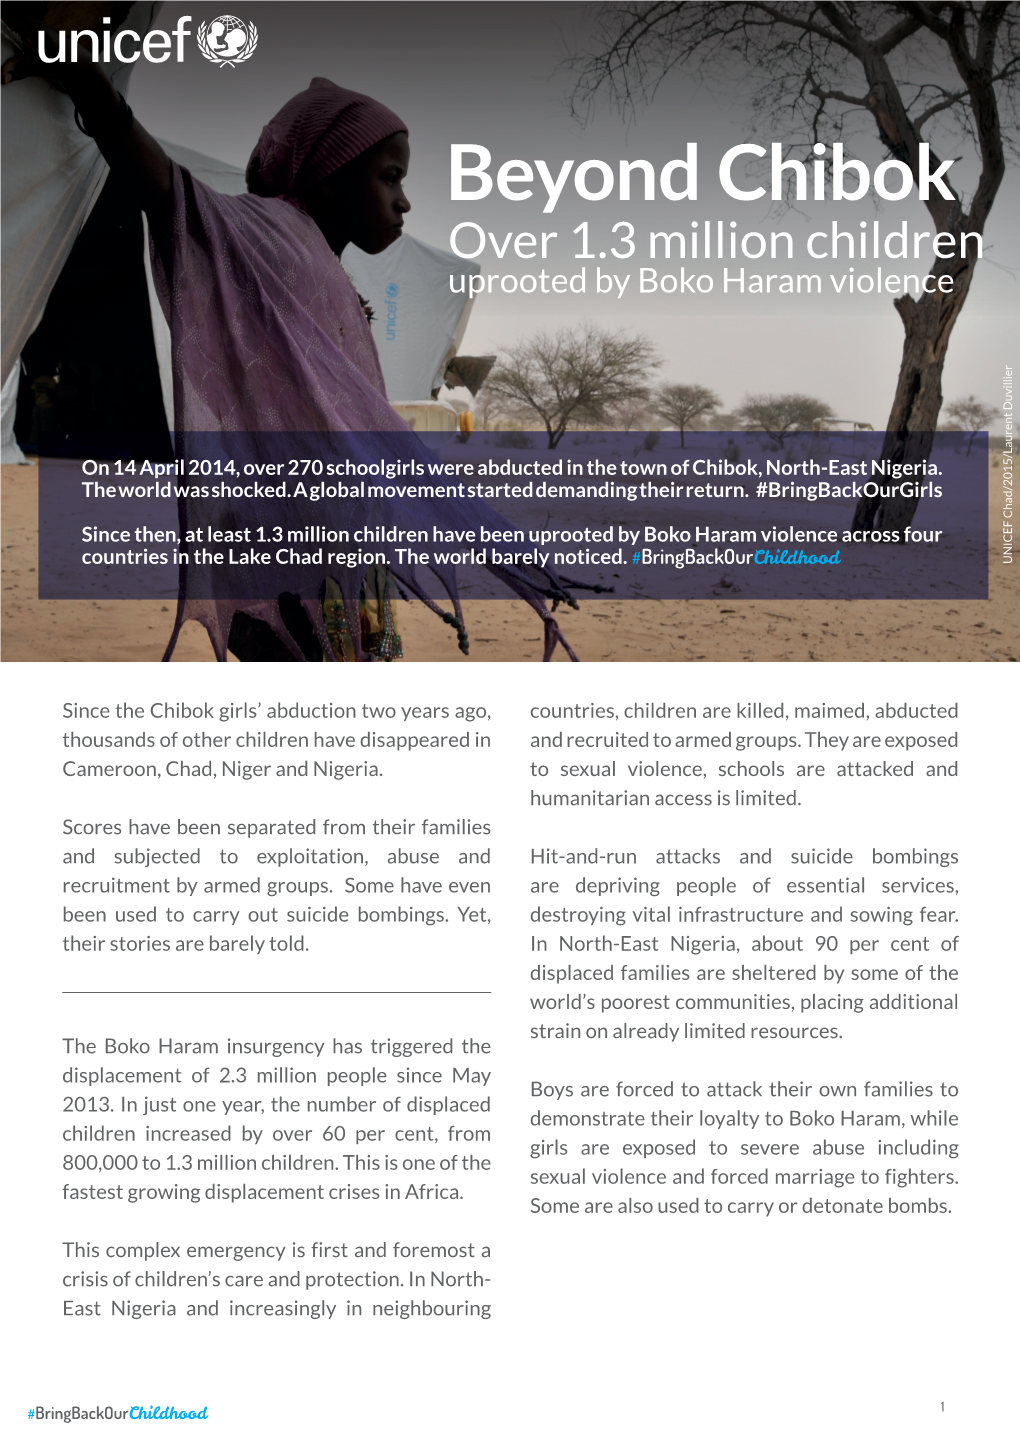 Beyond Chibok Over 1.3 Million Children Uprooted by Boko Haram Violence